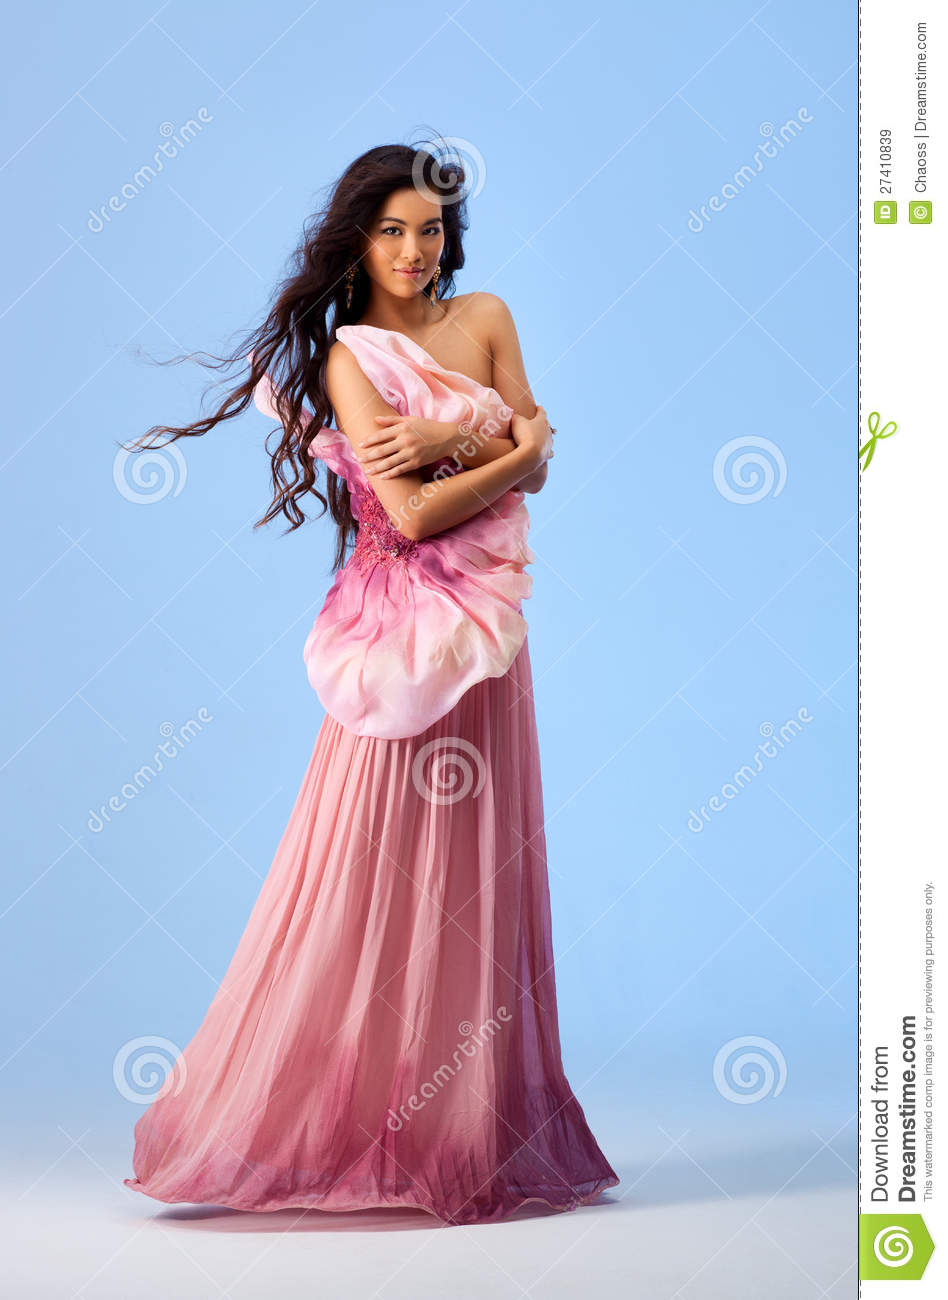 Young Vietnamese Woman Royalty Free Stock Images   Image  27410839